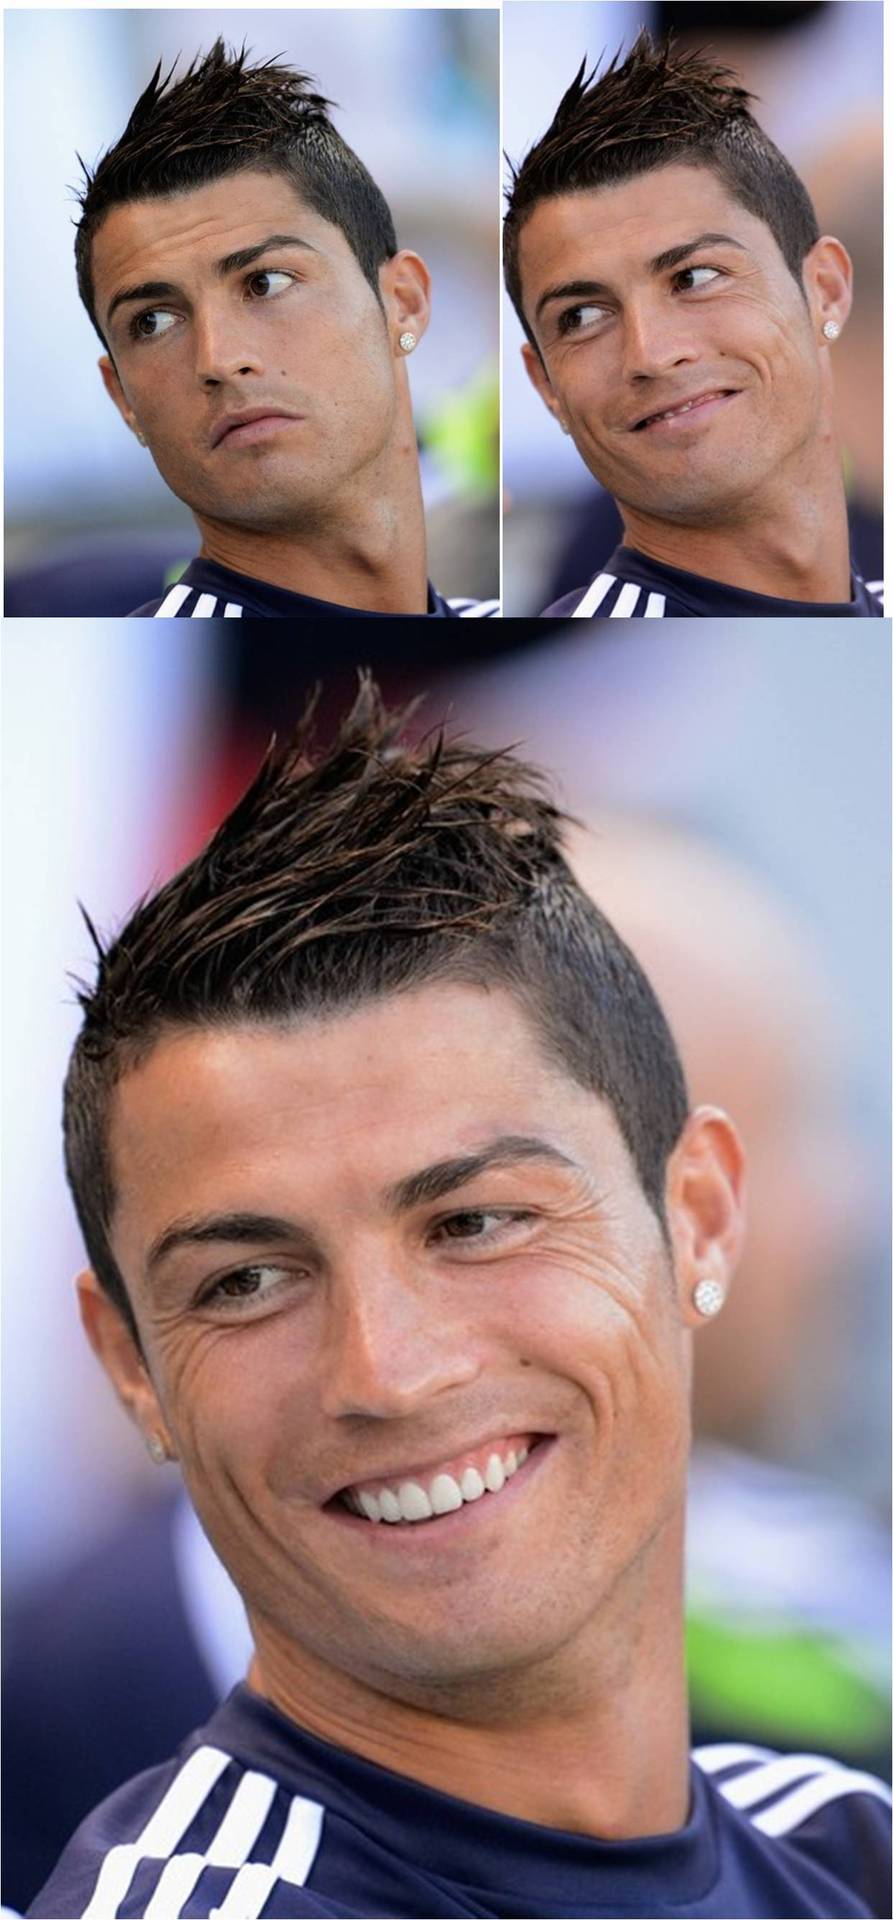 Sigh!(via Photo from Getty Images)
LA Galaxy vs. Real Madrid 1:5, 03.08.2012